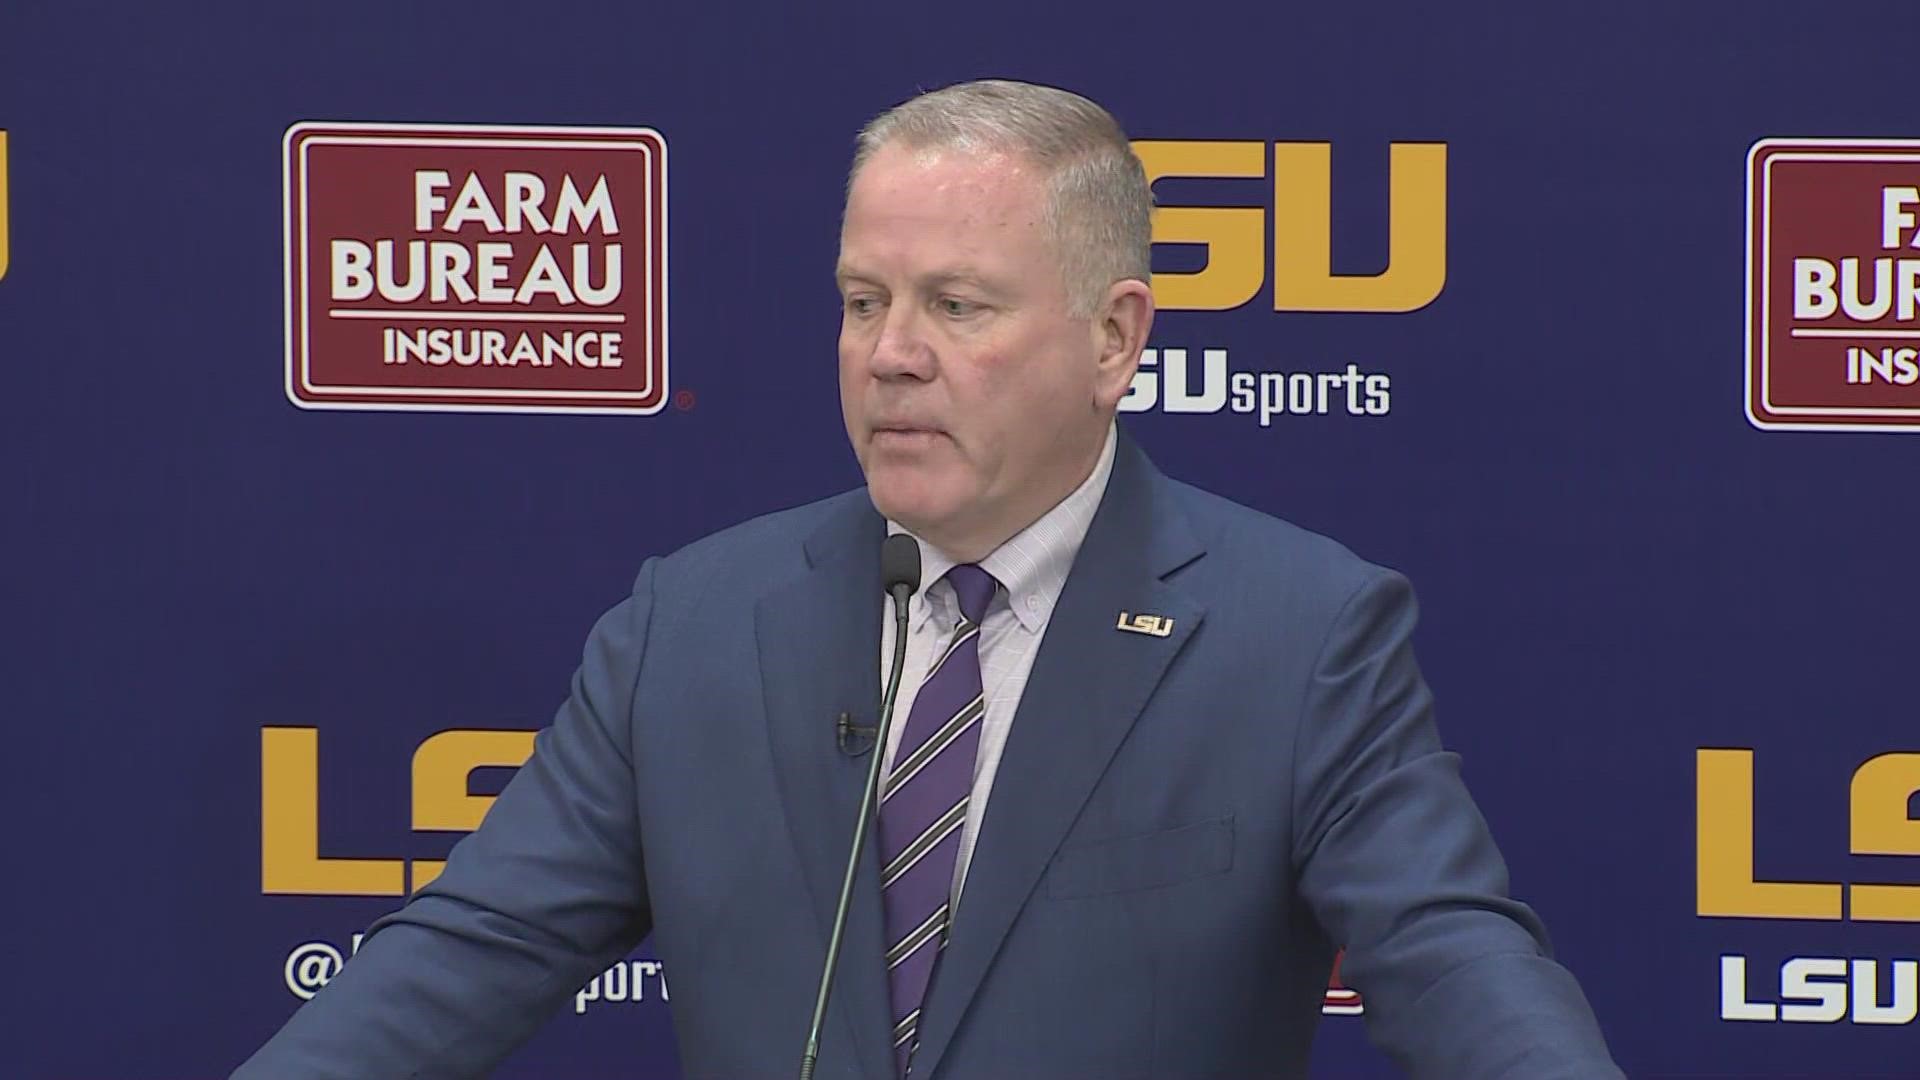 Brian Kelly said that there are high standards at LSU and that he plans to fulfill those standards.